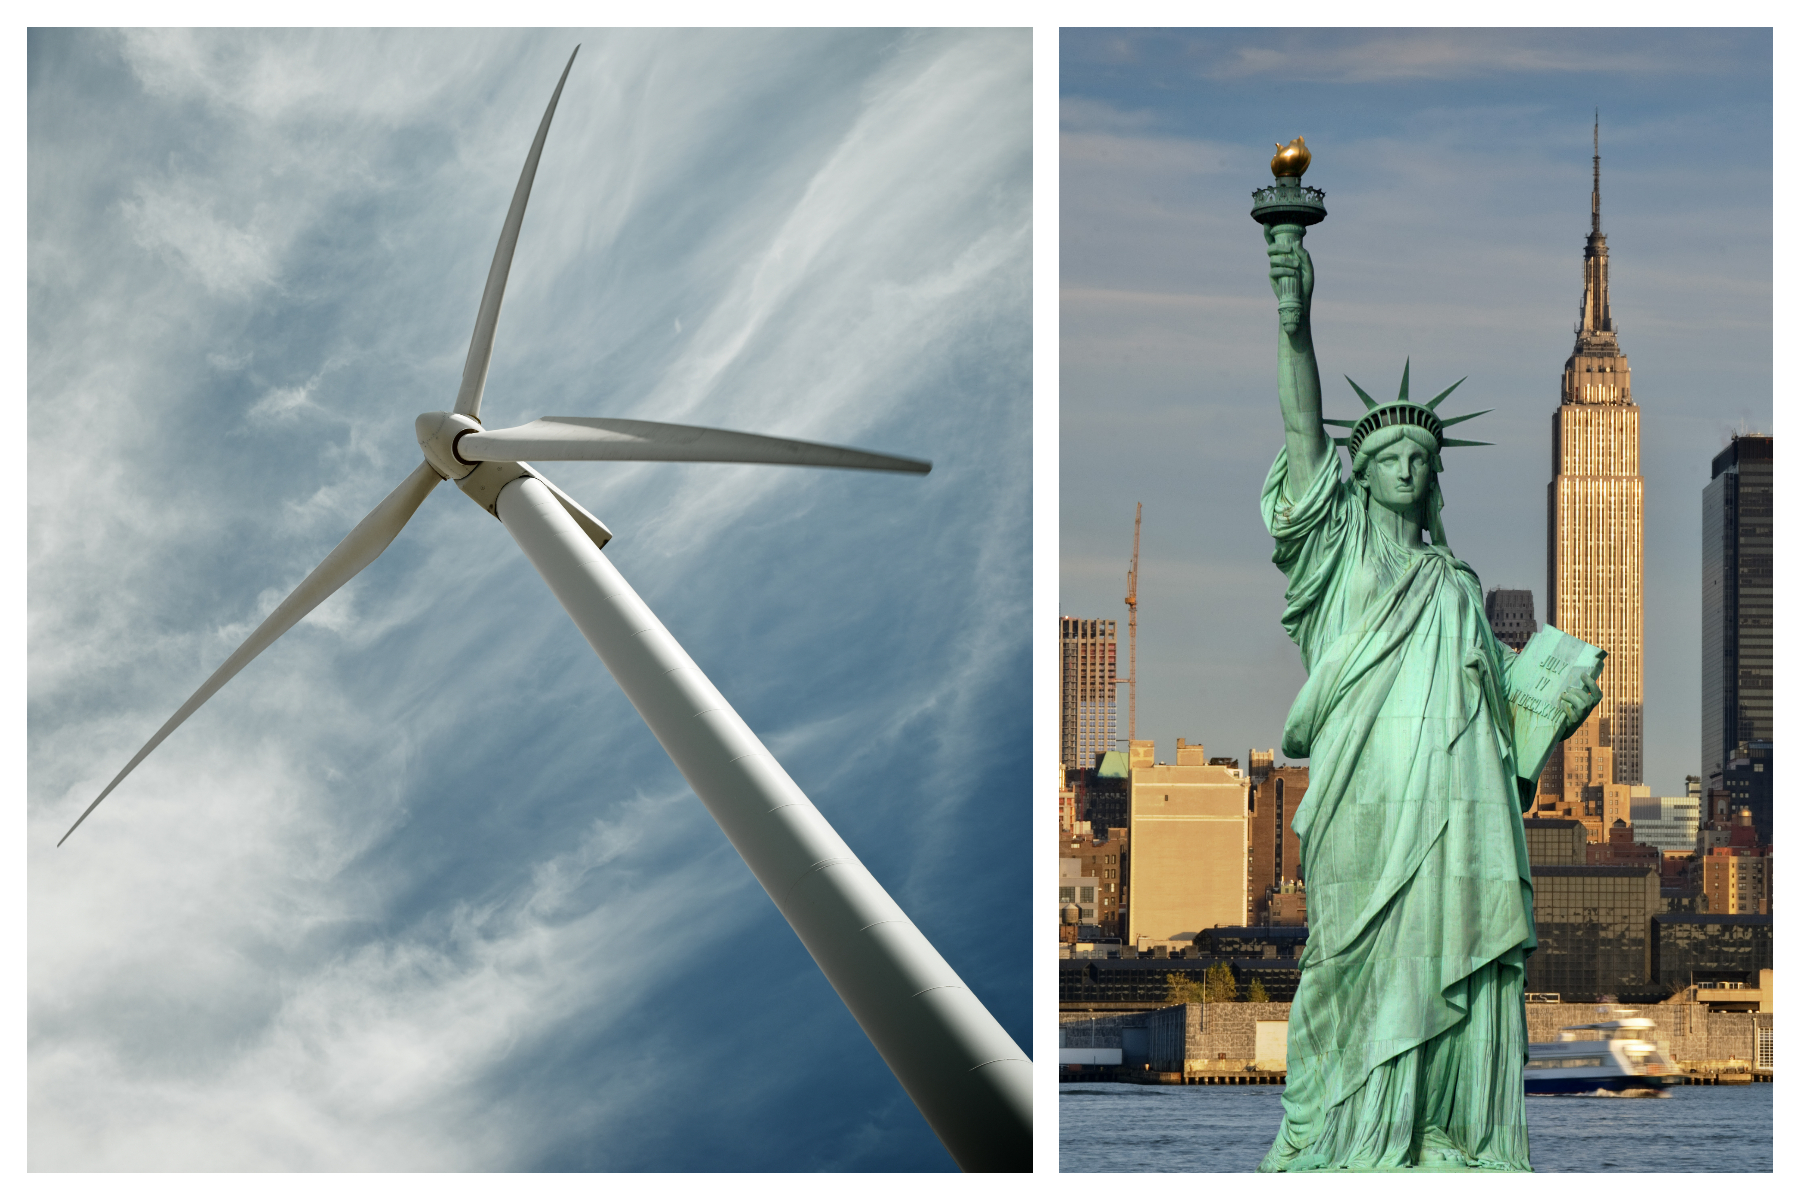 Wind Turbine With Blades Bigger Than Statue of Liberty Breaks World Record